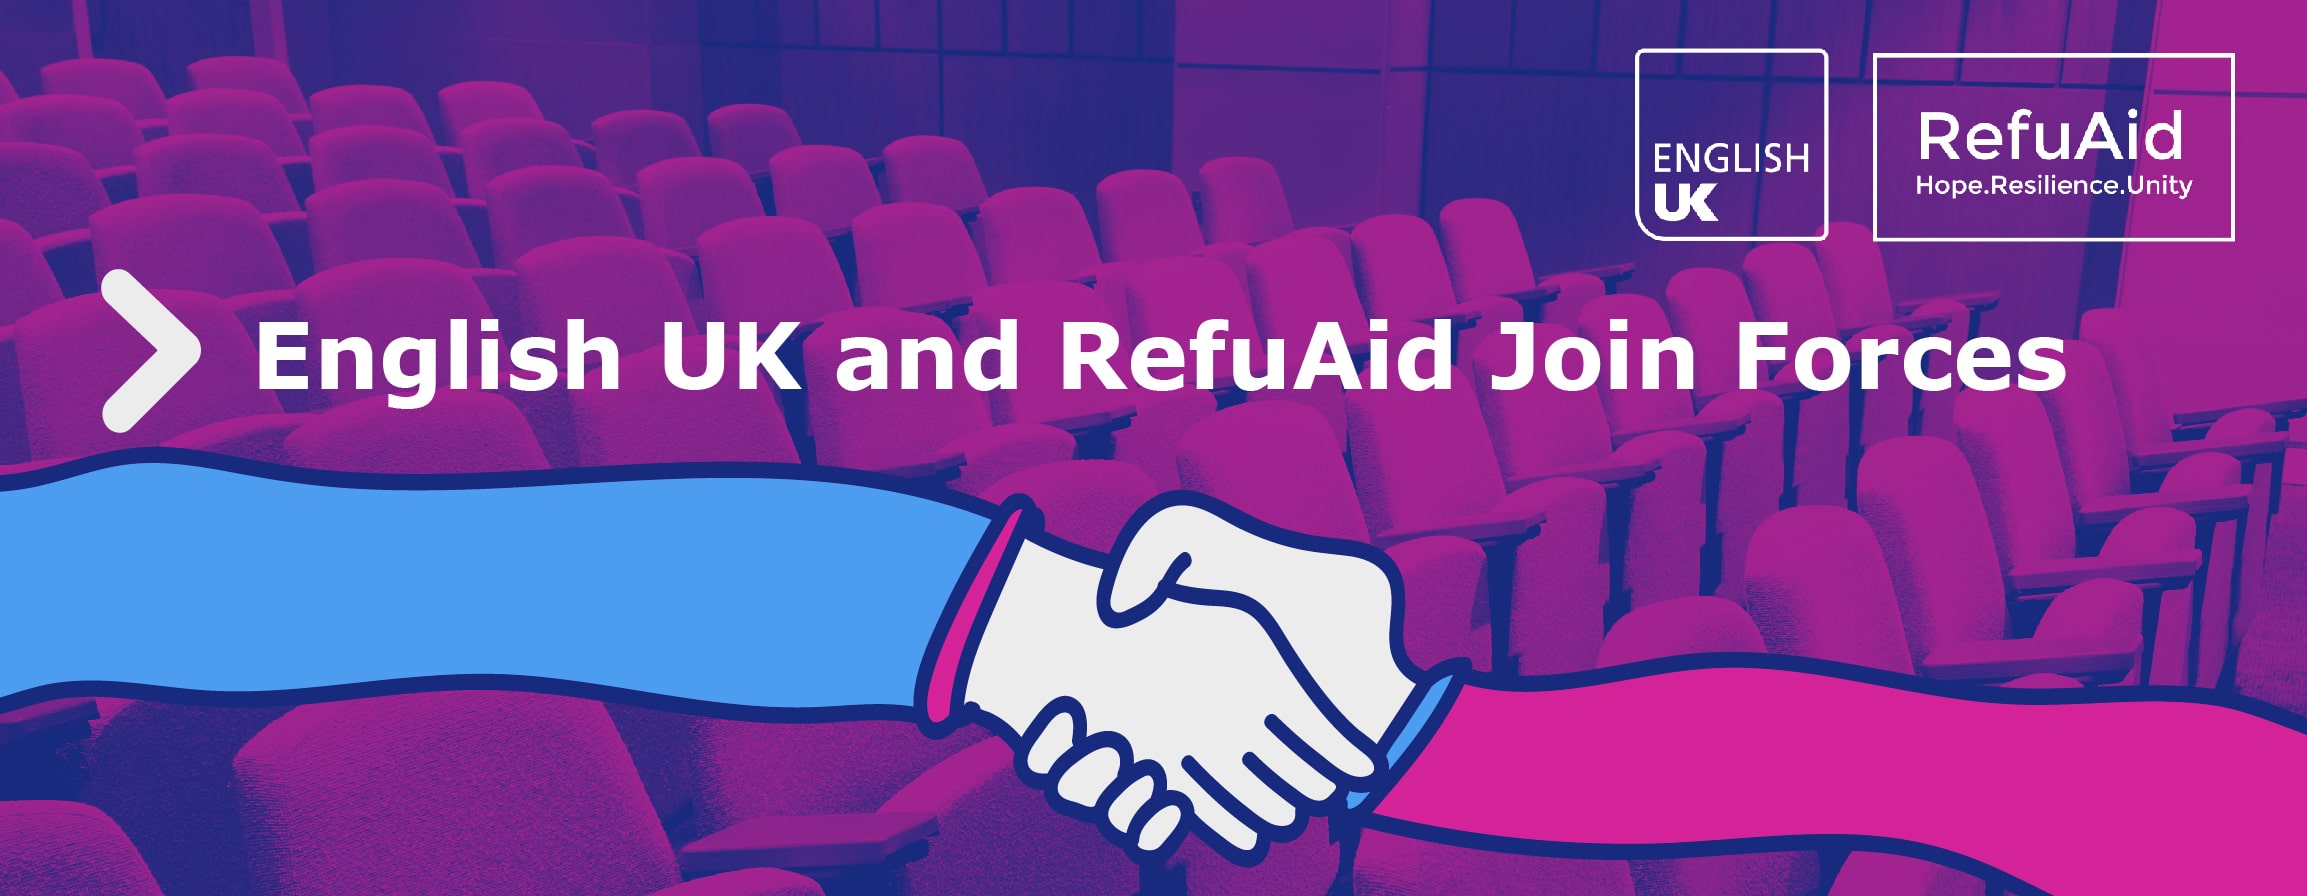 English UK and RefuAid Join Forces